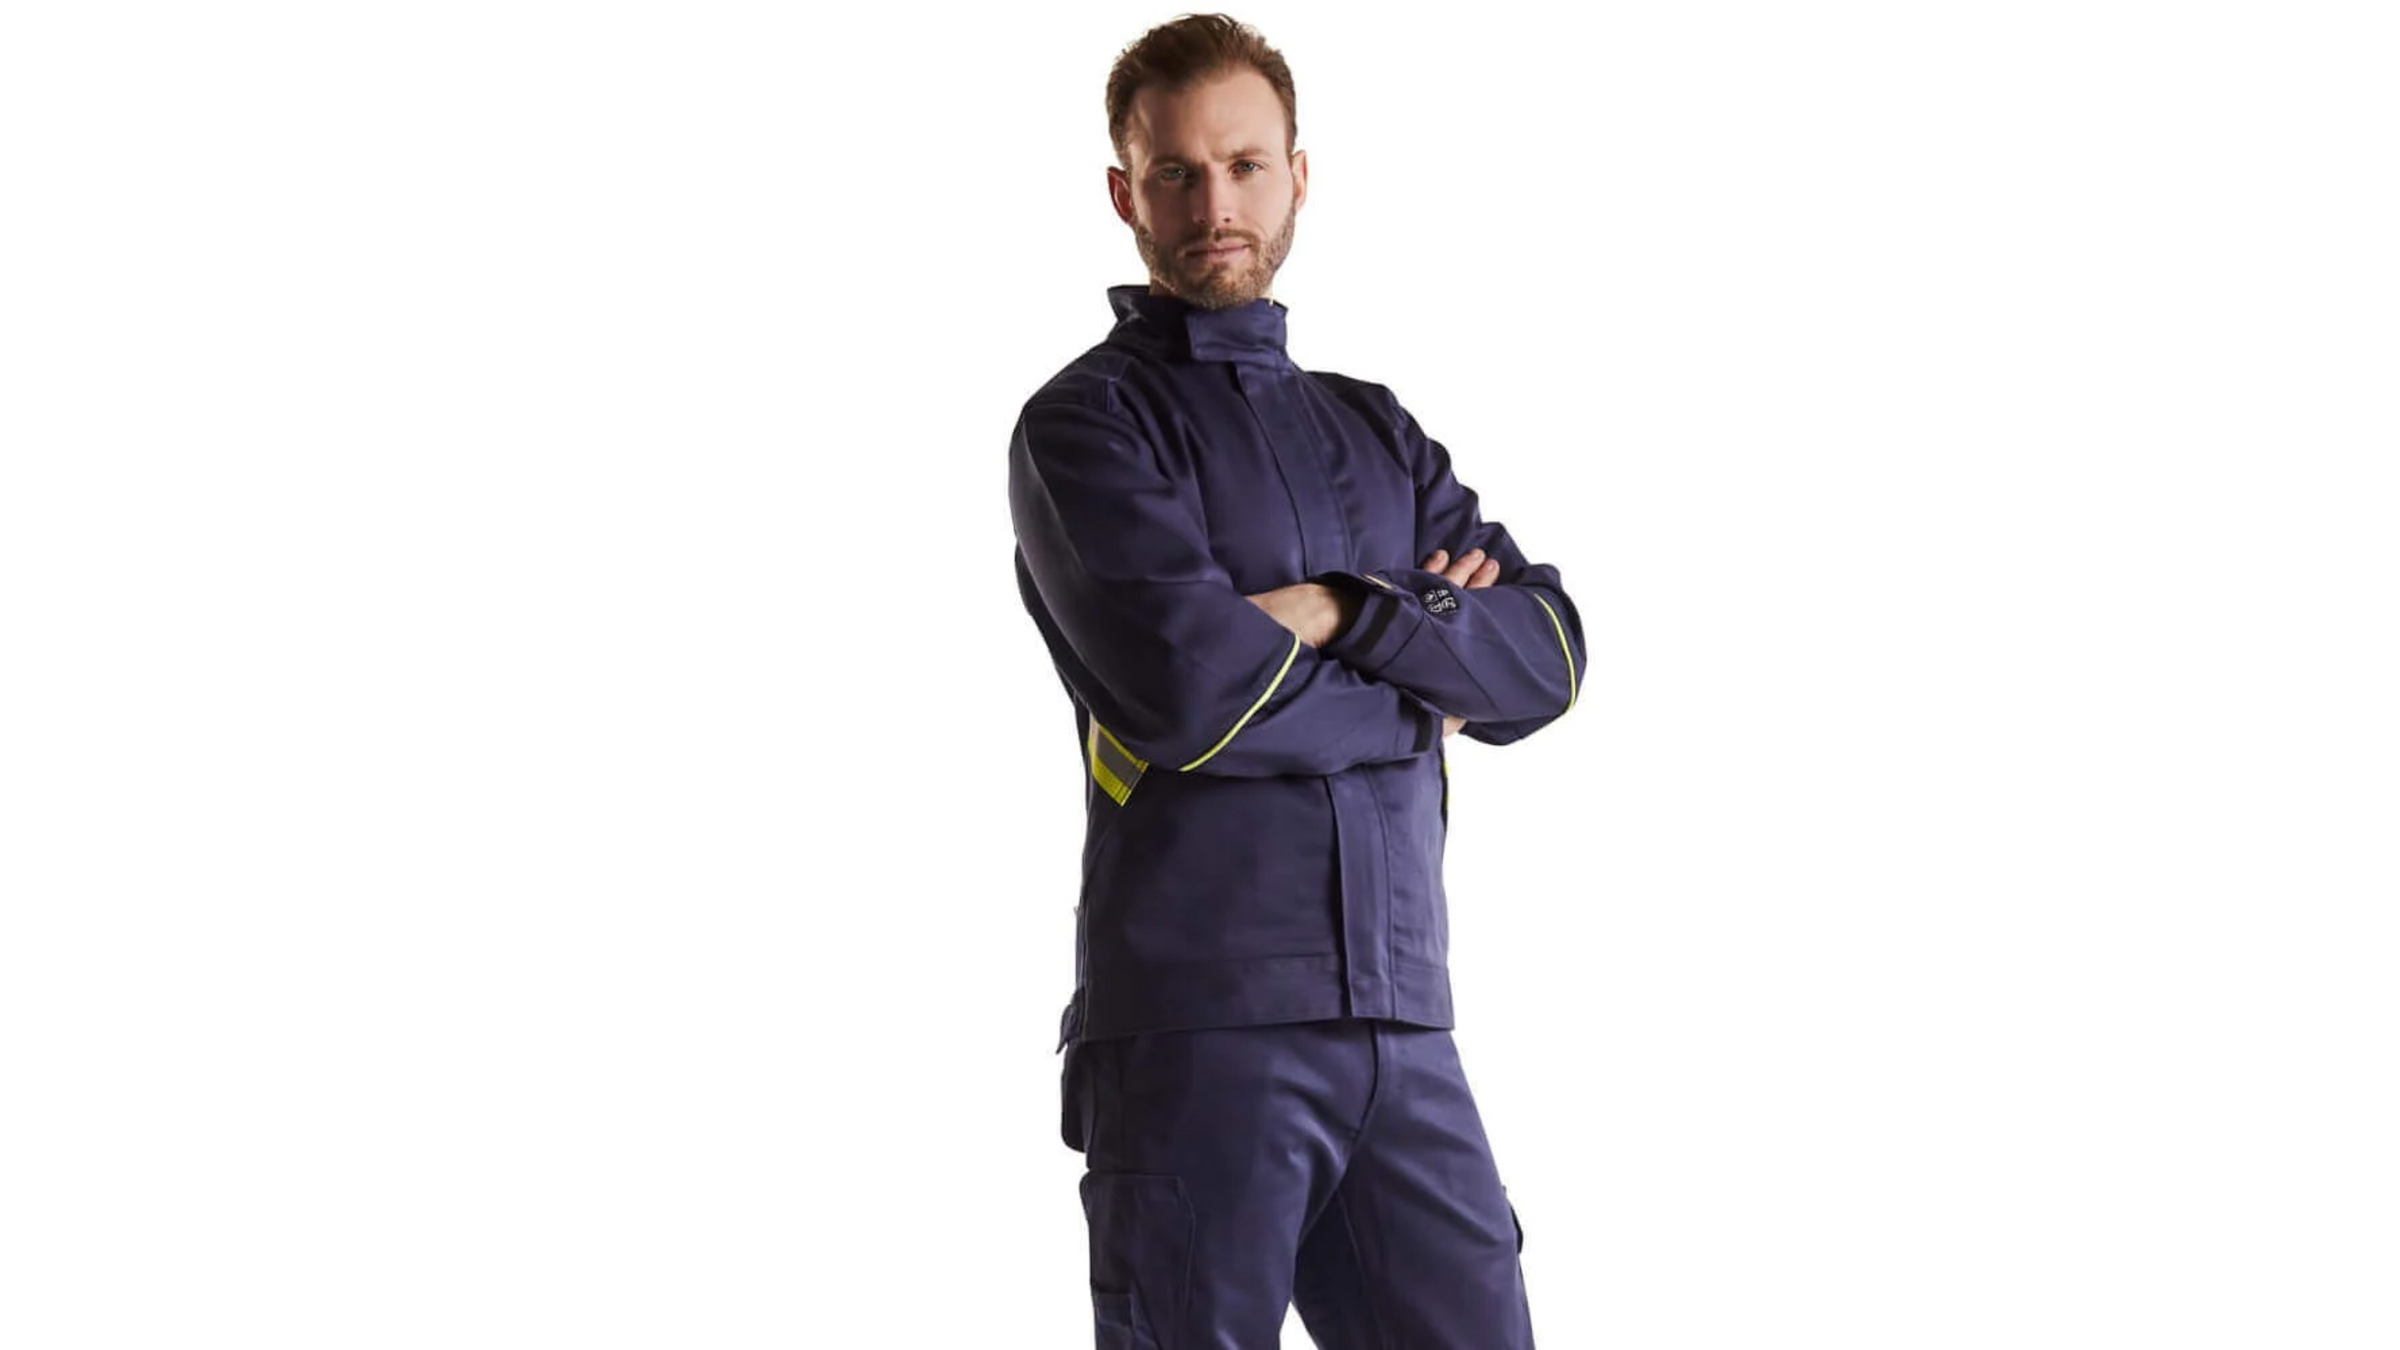 An image of Welding Jacket being modelled